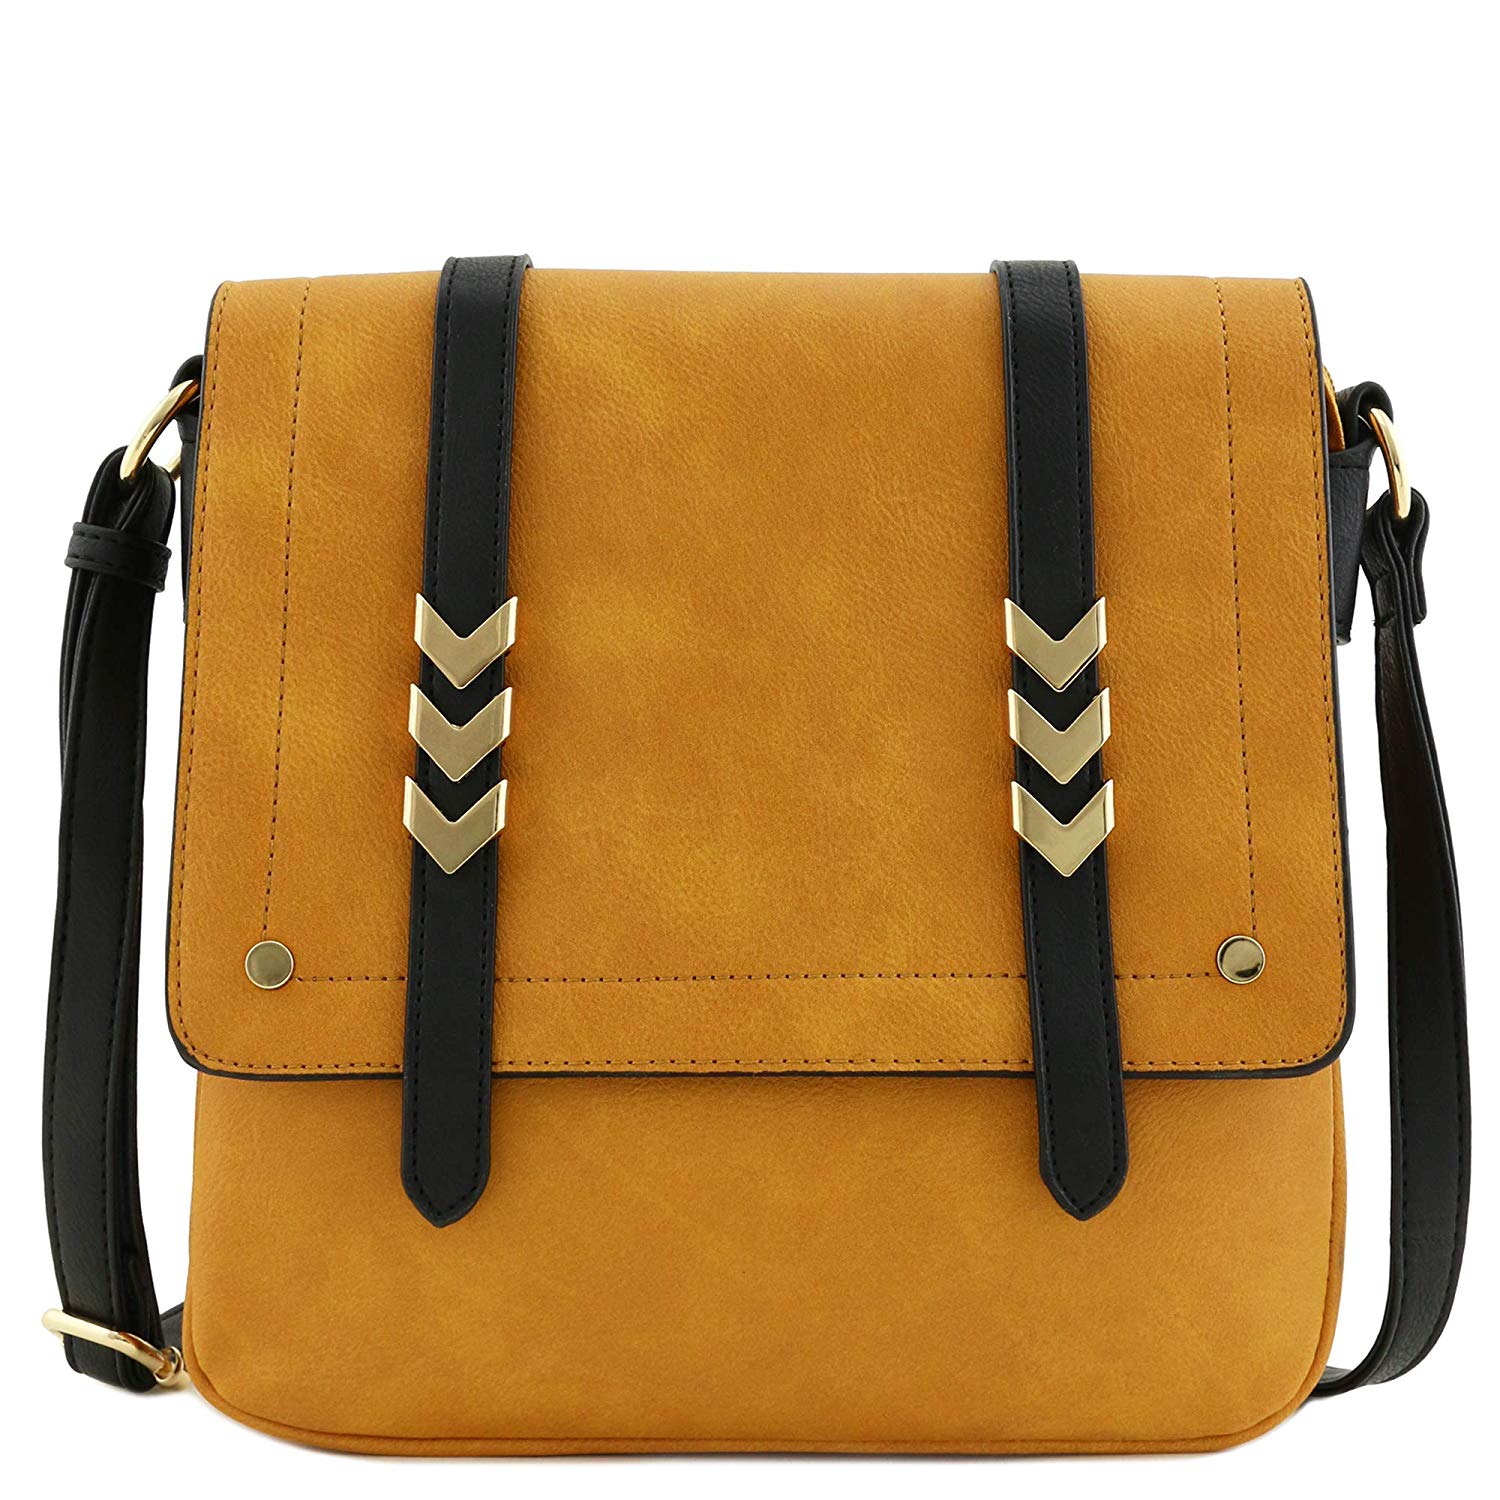 Double Compartment Large Flapover Crossbody Bag by Alyssa